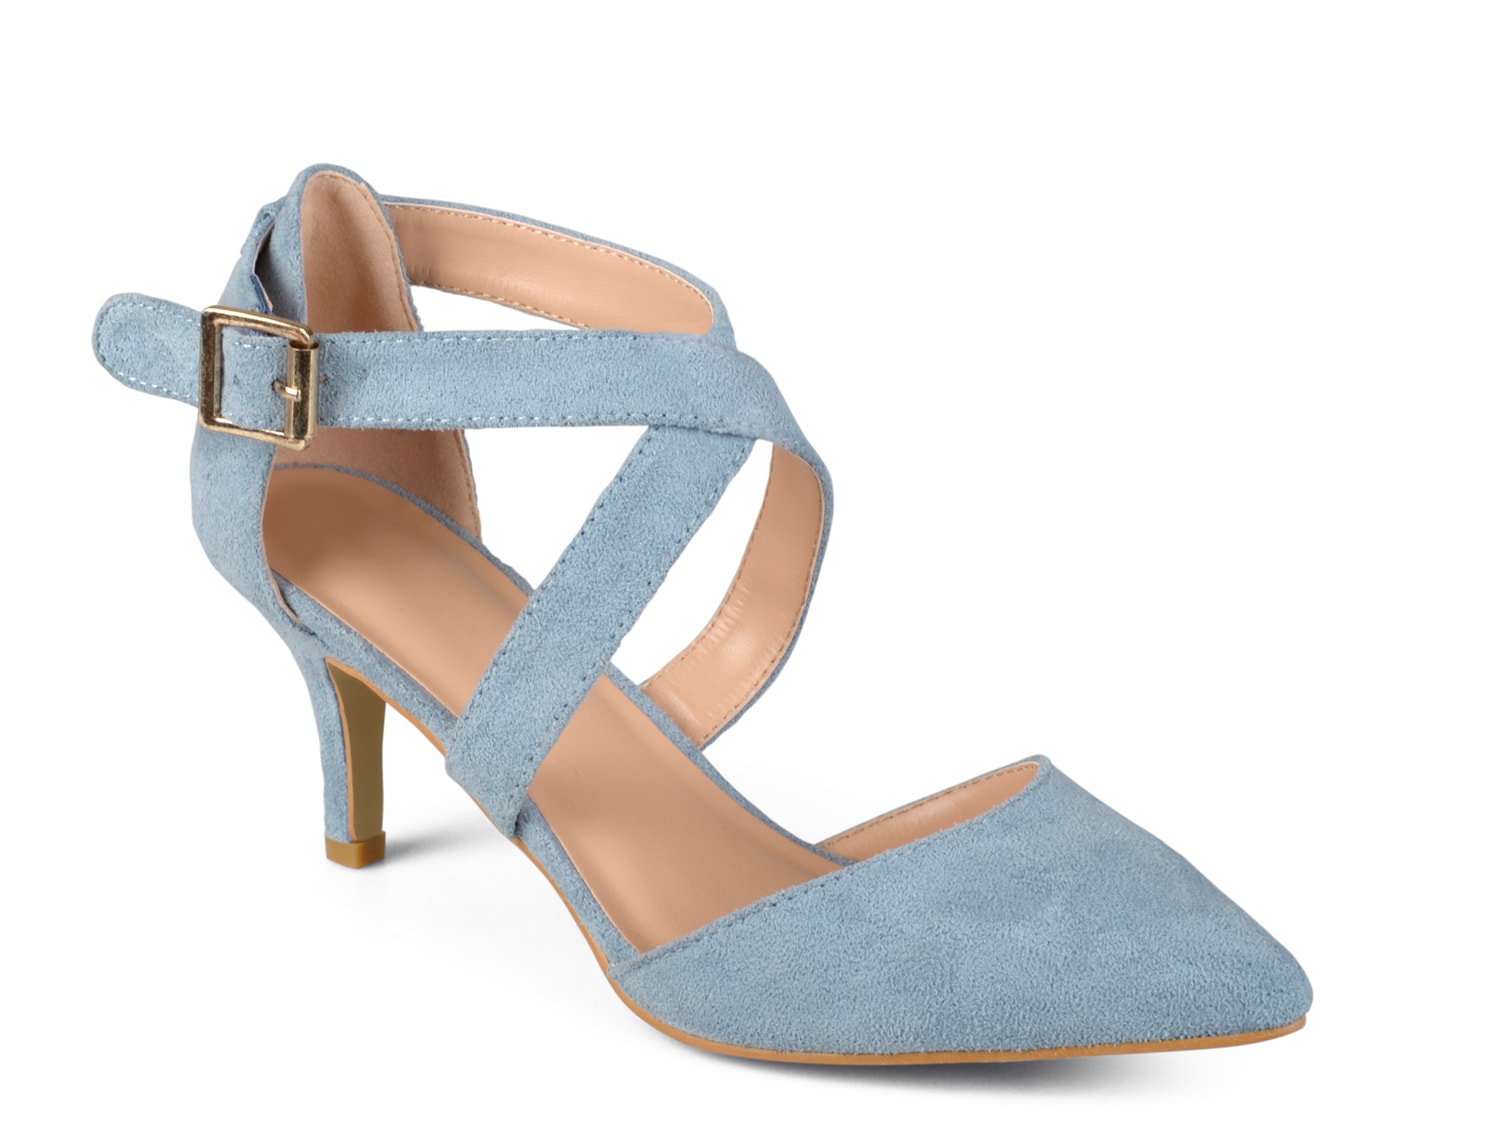 Journee Collection Dara Pump - Free Shipping | DSW